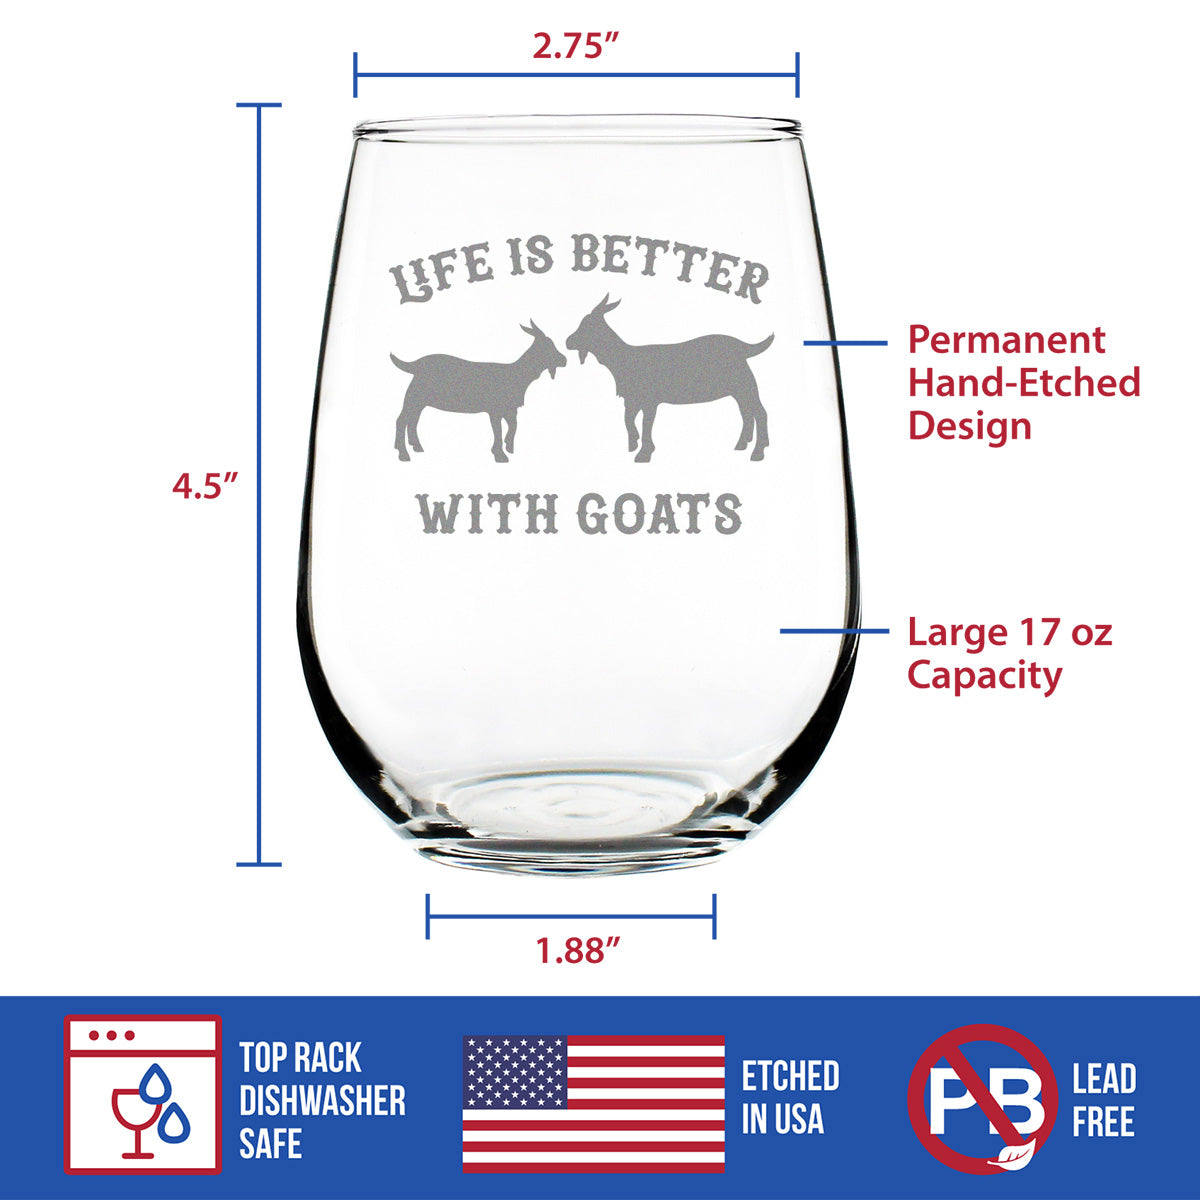 Life is Better With Goats - Goat Stemless Wine Glass - Cute Funny Farm Animal Themed Decor and Gifts - Large 17 Oz